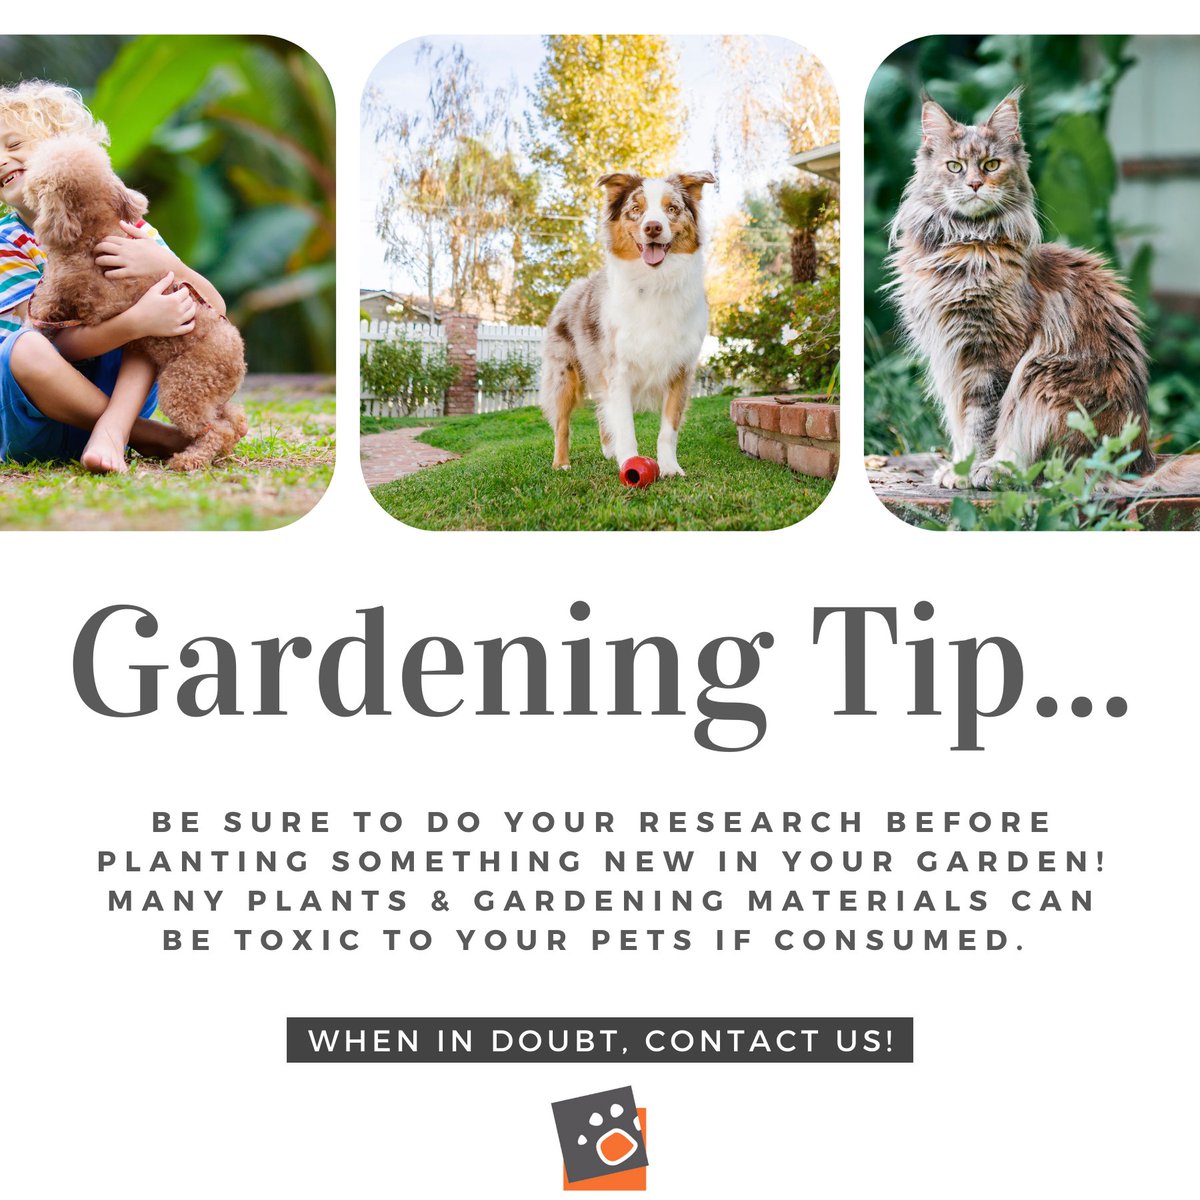 Green thumbs, beware! 🌱🐾 Ensure your garden is pet-friendly by researching plants and materials. Some can be toxic to your furry friends. When in doubt, reach out to us! #PetSafety #GardenCare